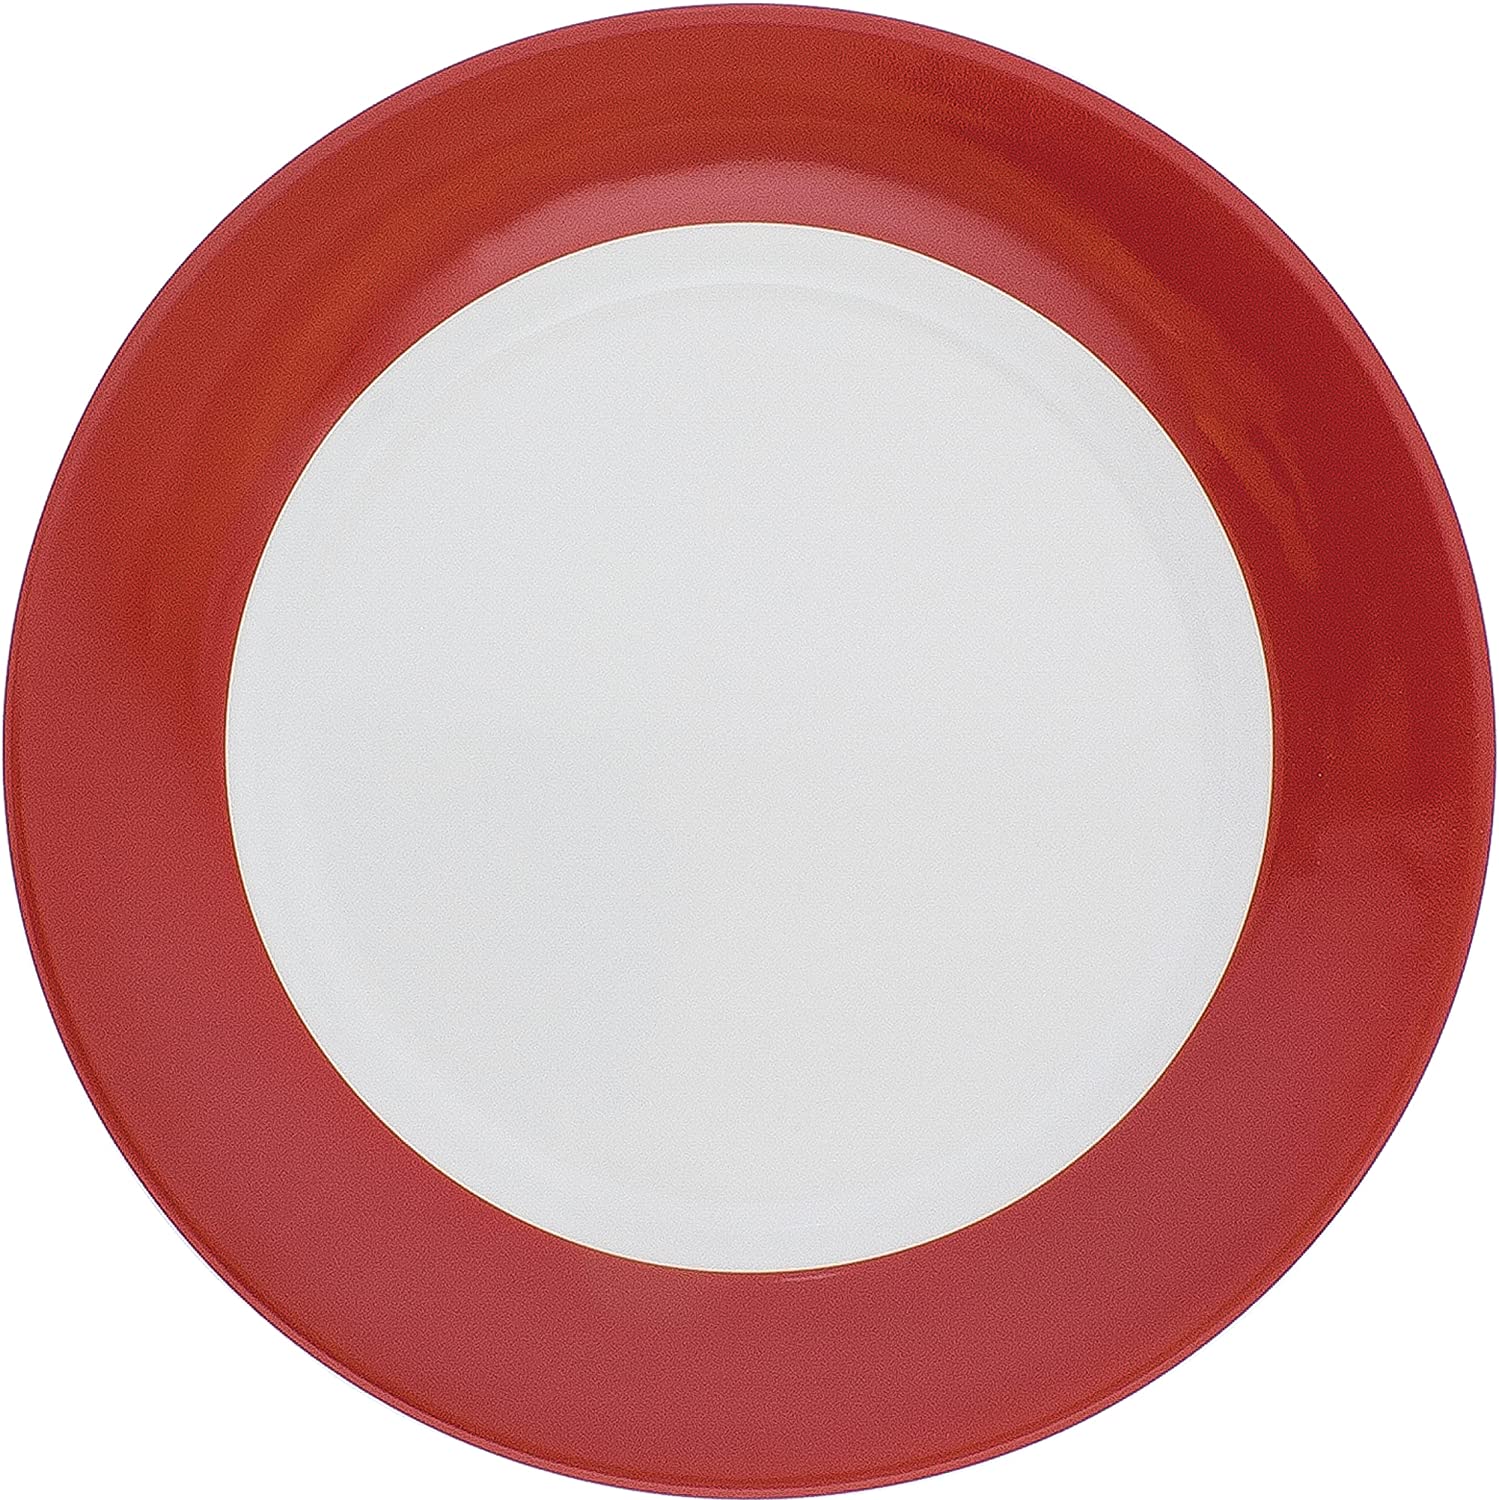 KAHLA Pronto Colore Dinner Plate, 26 cm, Red